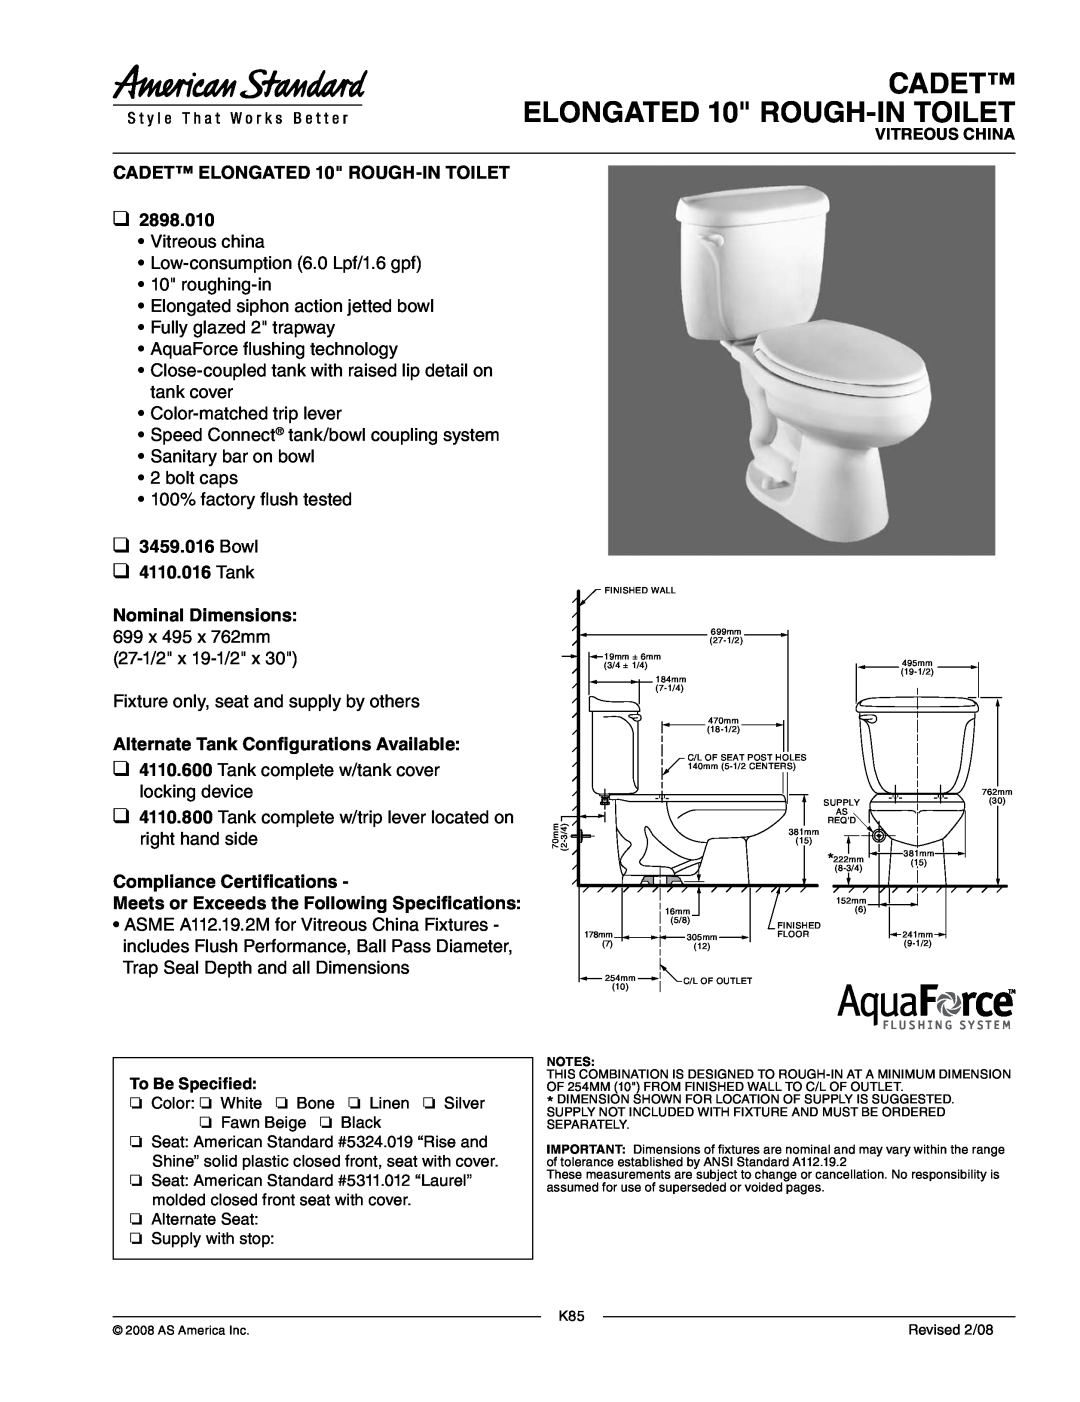 American Standard 4110.600 dimensions CADET ELONGATED 10 ROUGH-INTOILET, Bowl 4110.016 Tank, Compliance Certifications 